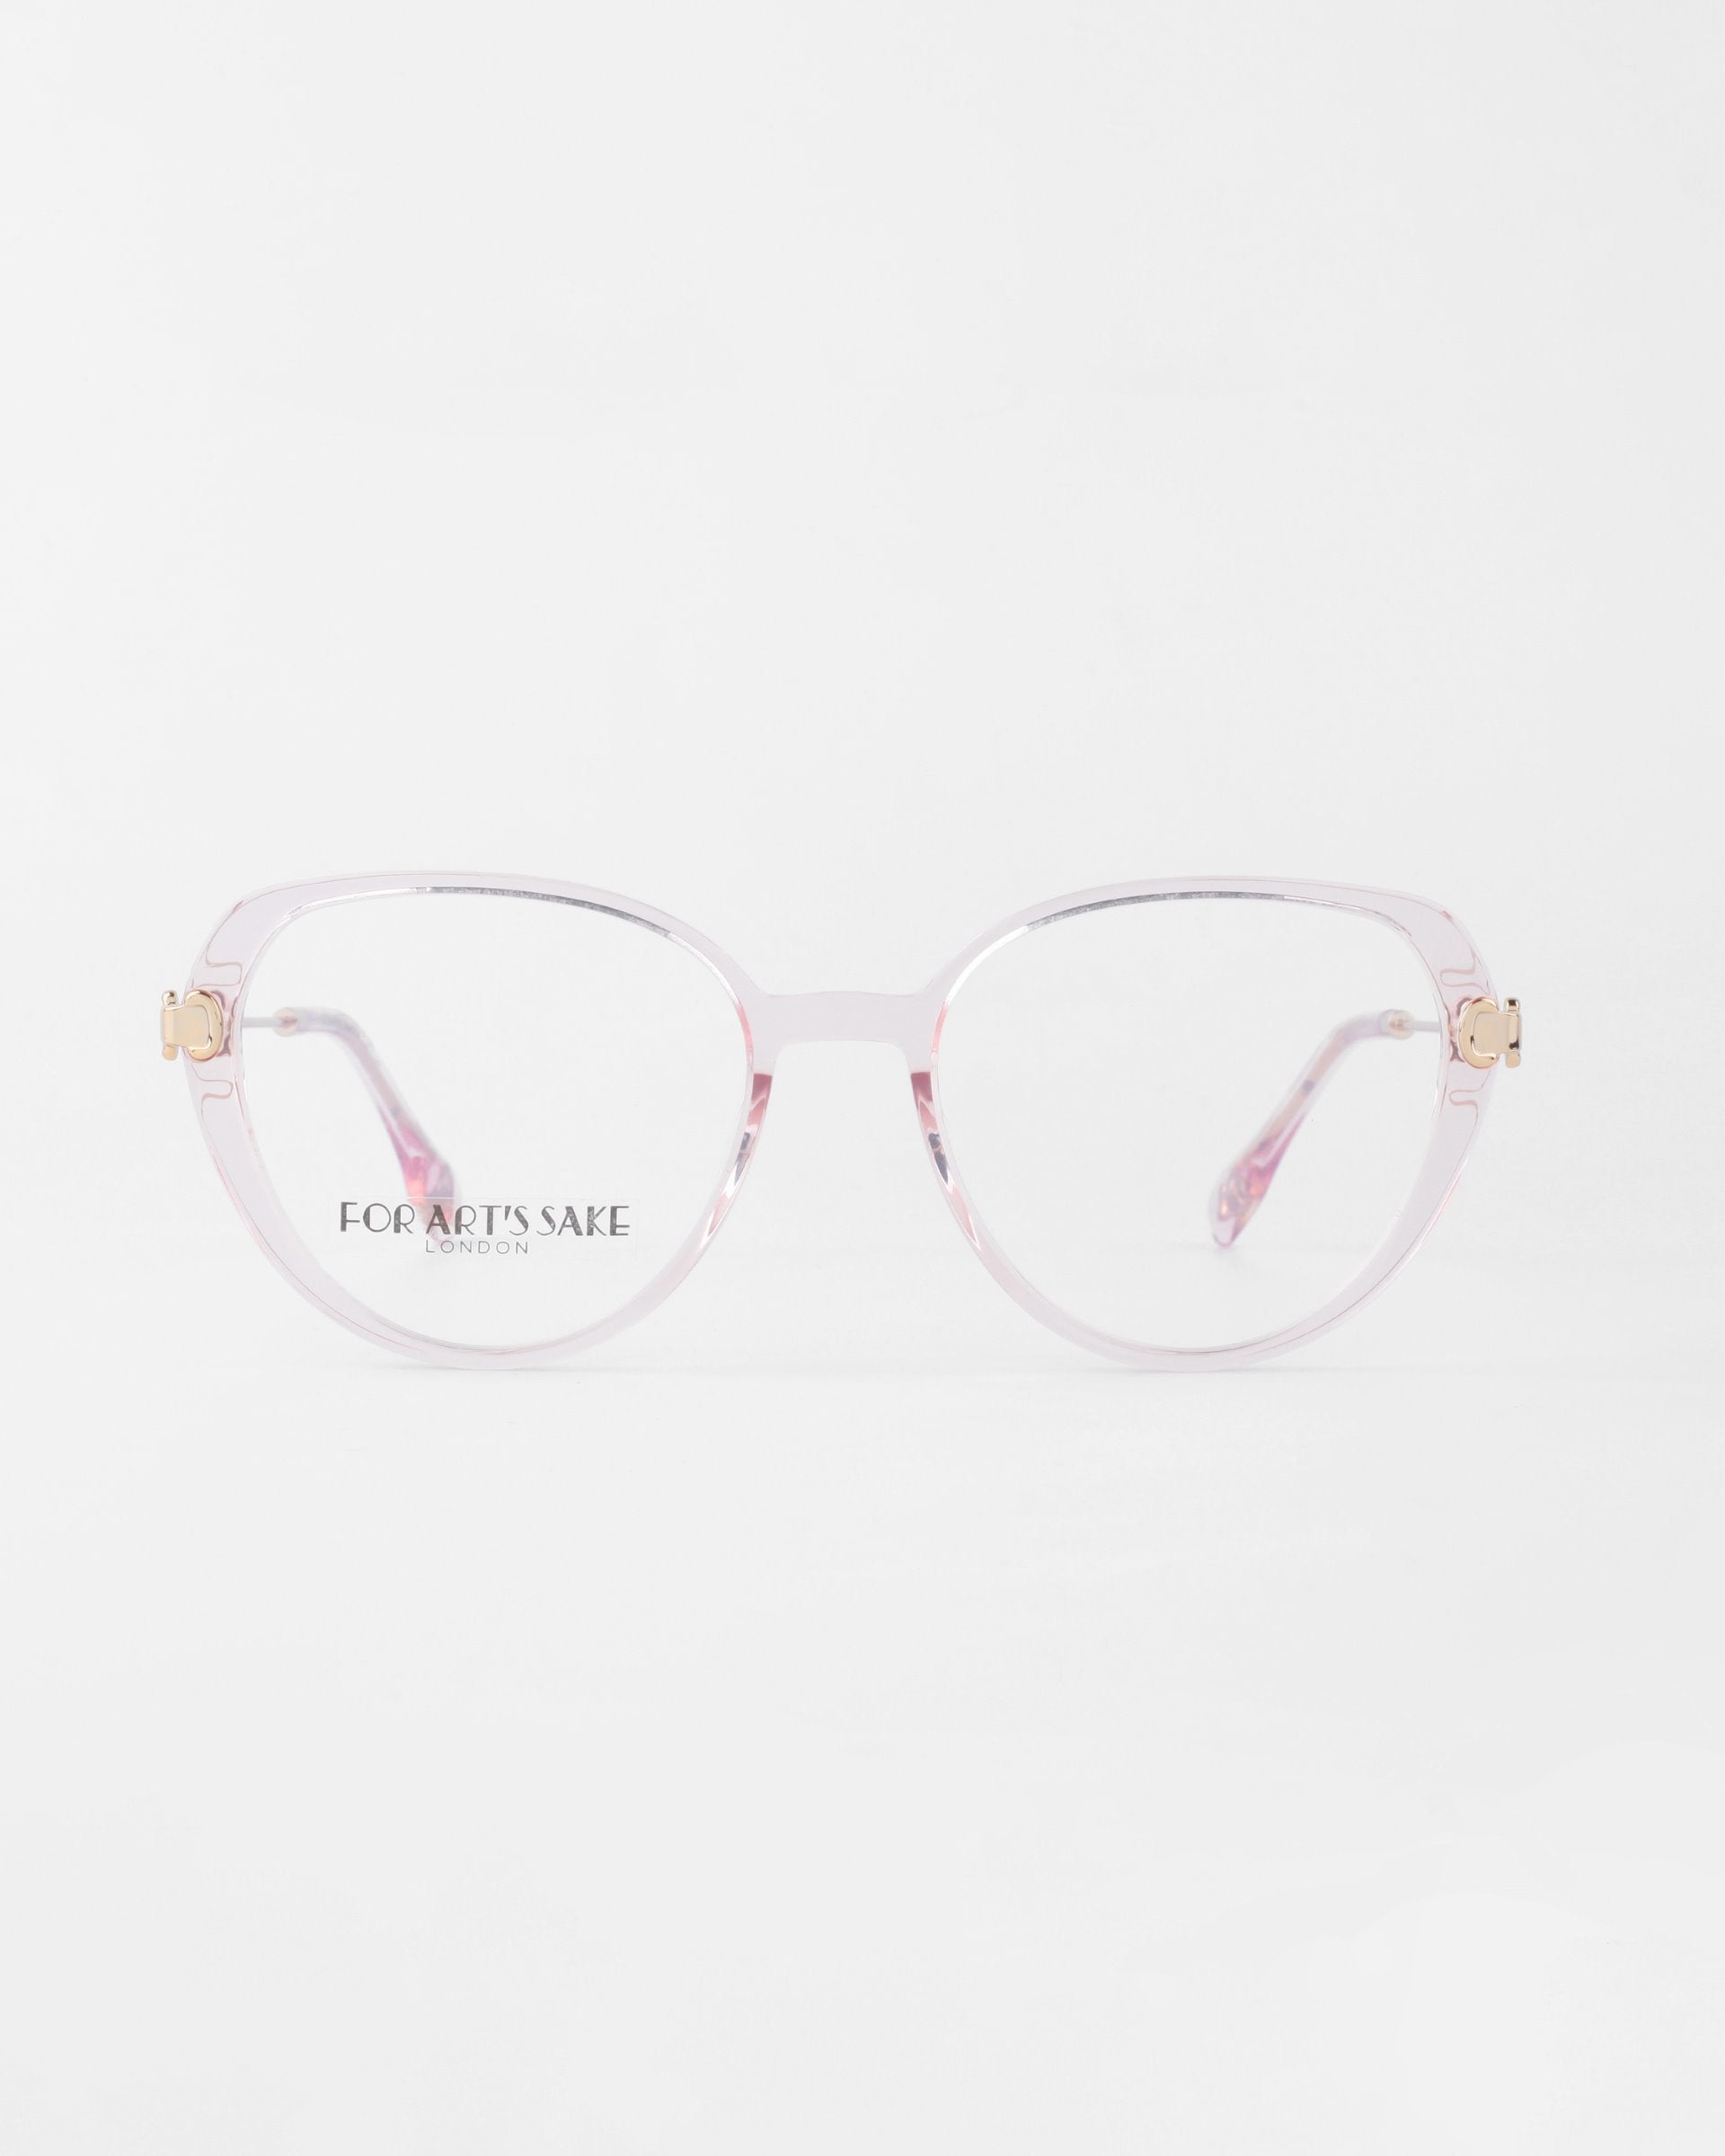 A pair of transparent glasses with light pink rims and thin pink arms. The brand name &quot;For Art&#39;s Sake®&quot; is visible on the left lens in black letters, with &quot;LONDON&quot; written below it. Featuring prescription lenses, the Waterhouse glasses are displayed against a plain, white background.